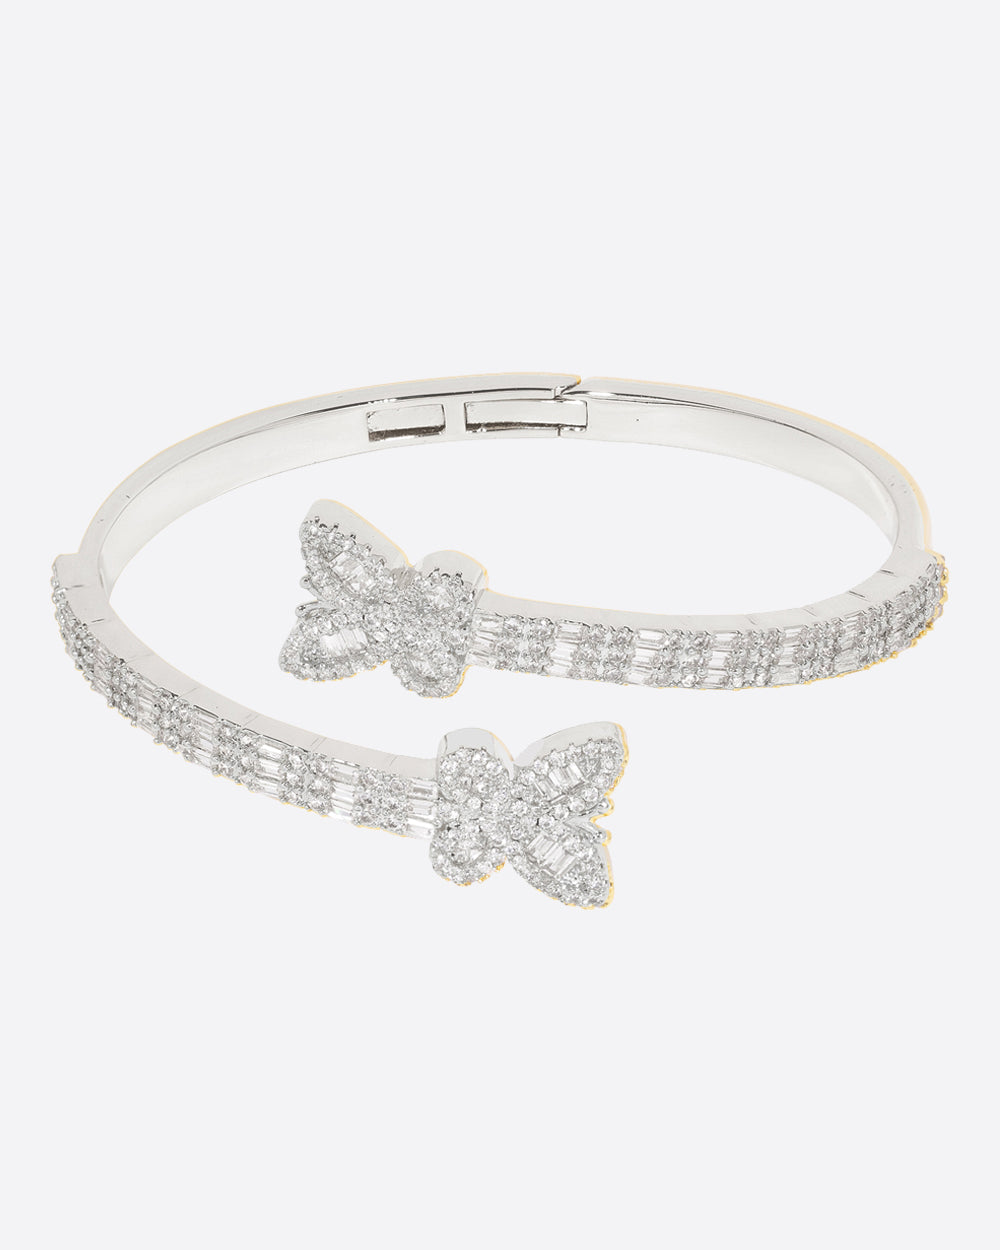 ICY BUTTERFLY BANGLE. - WHITE GOLD